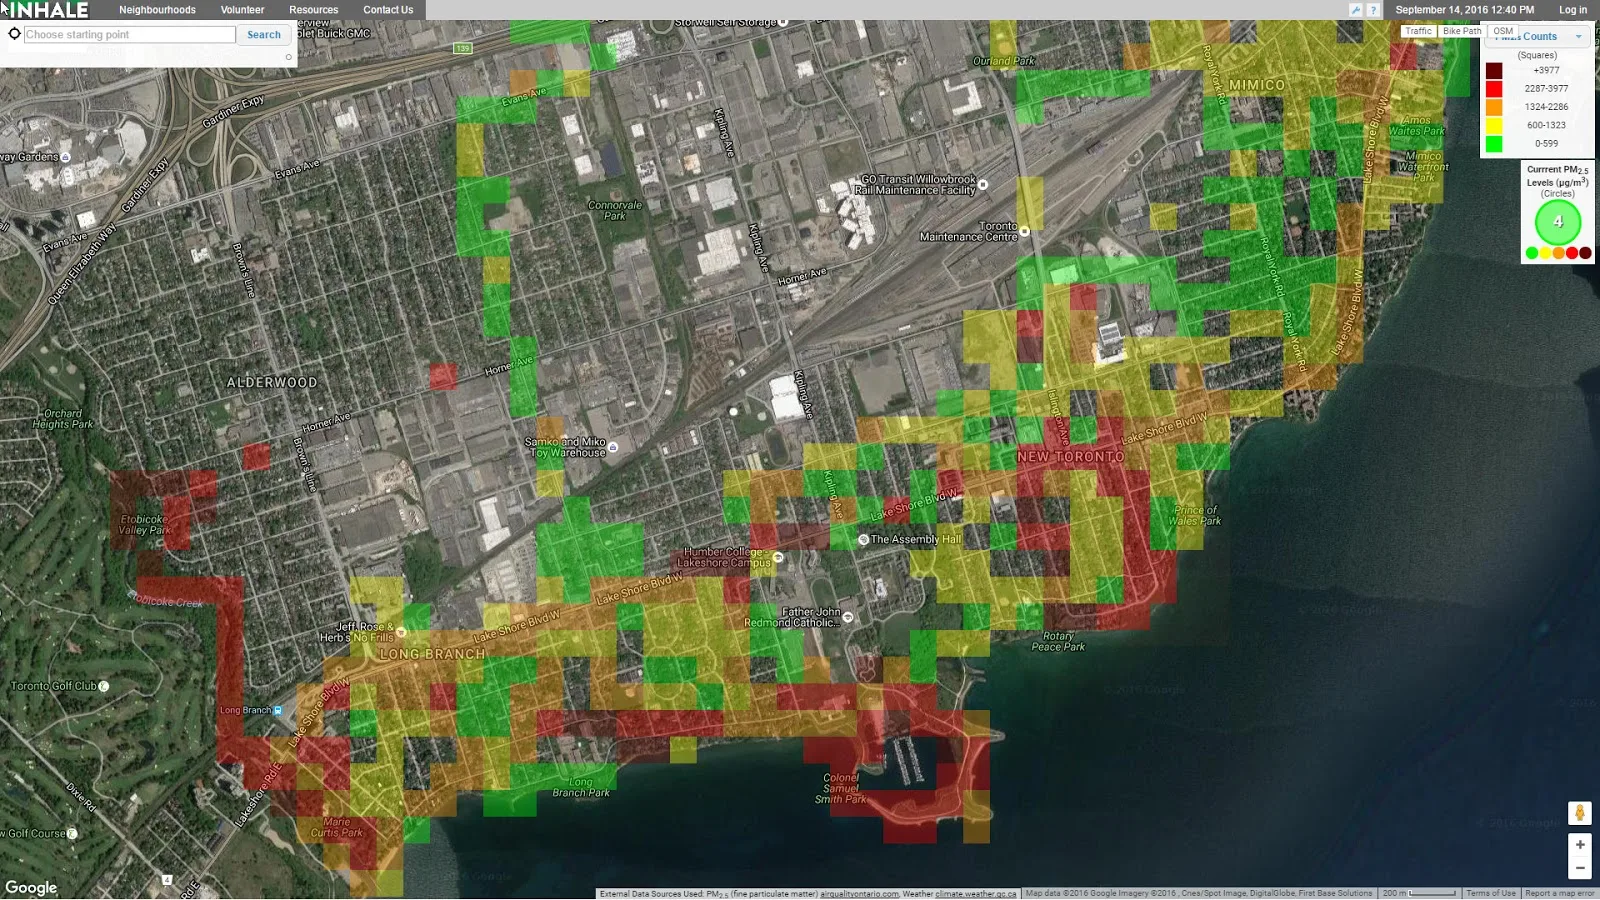 Toronto's Air Pollution Map